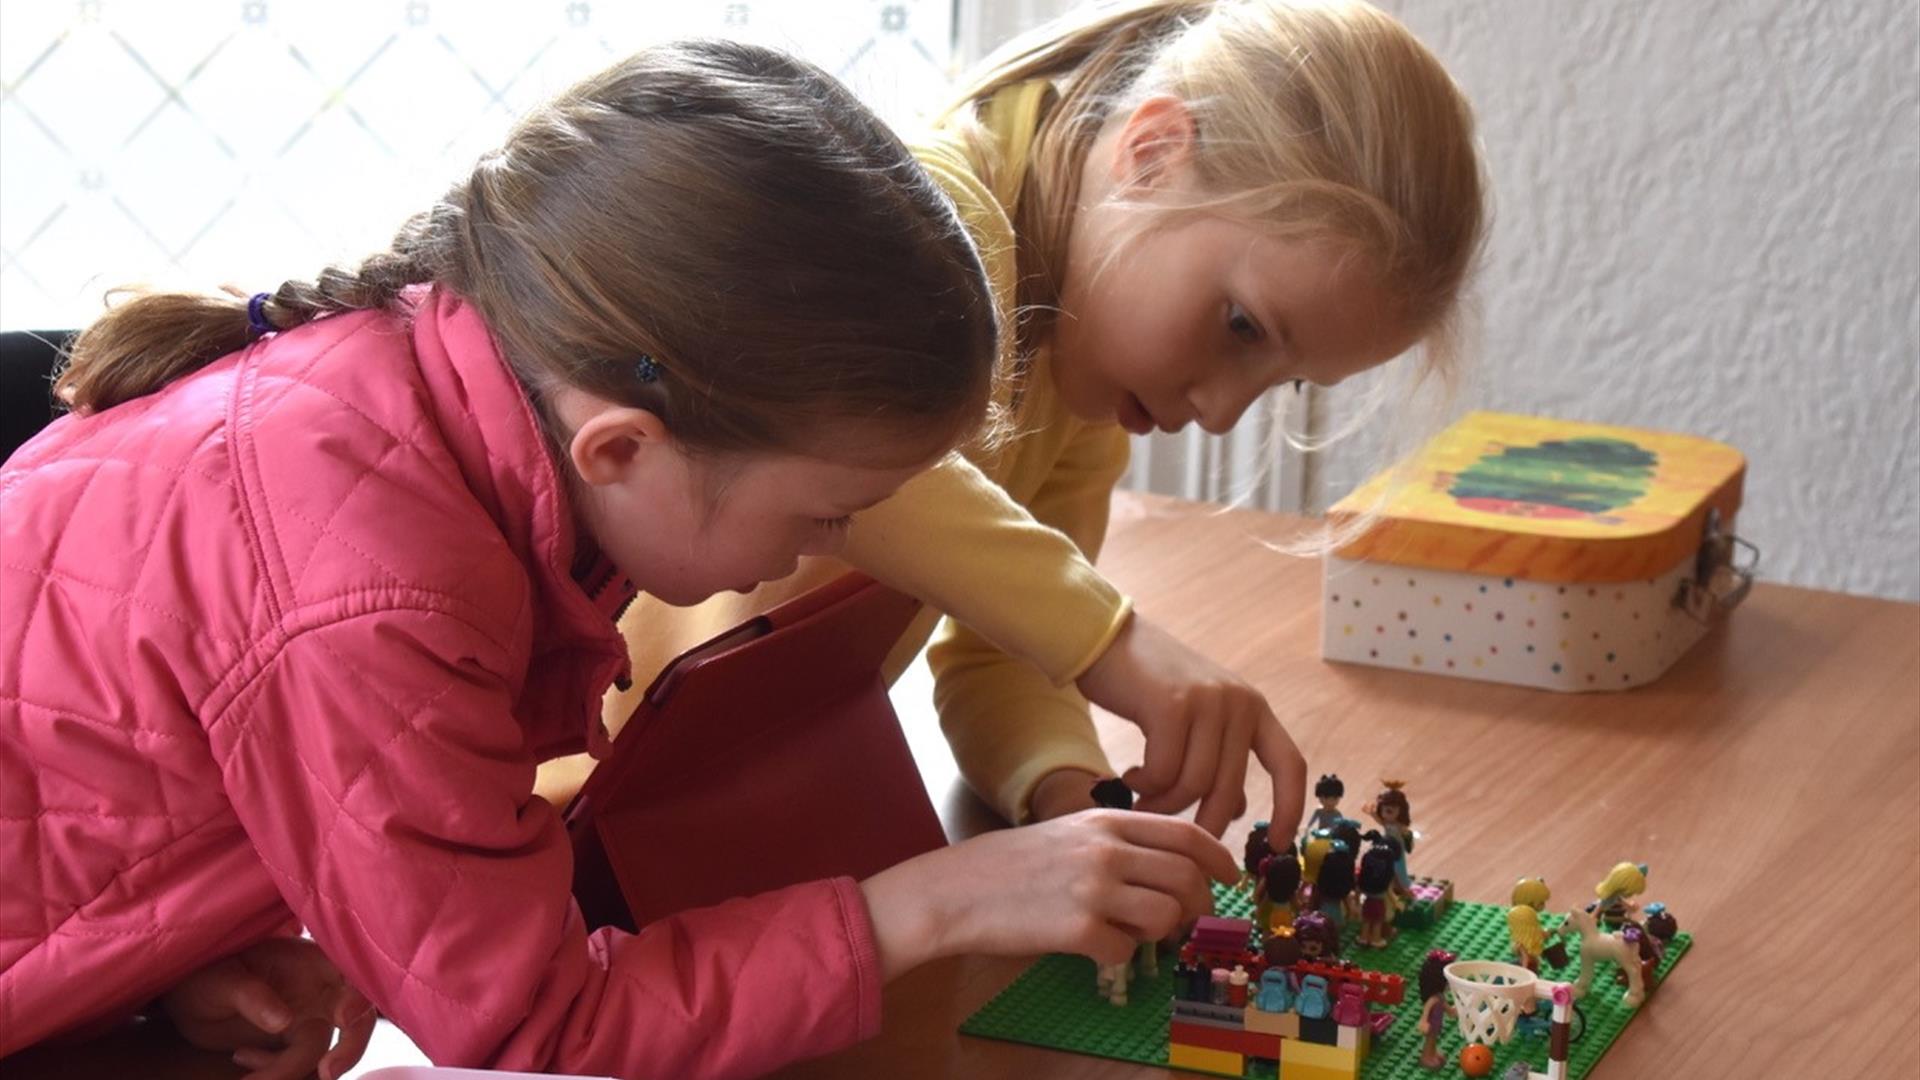 Image shows two young girls building a scene from Lego